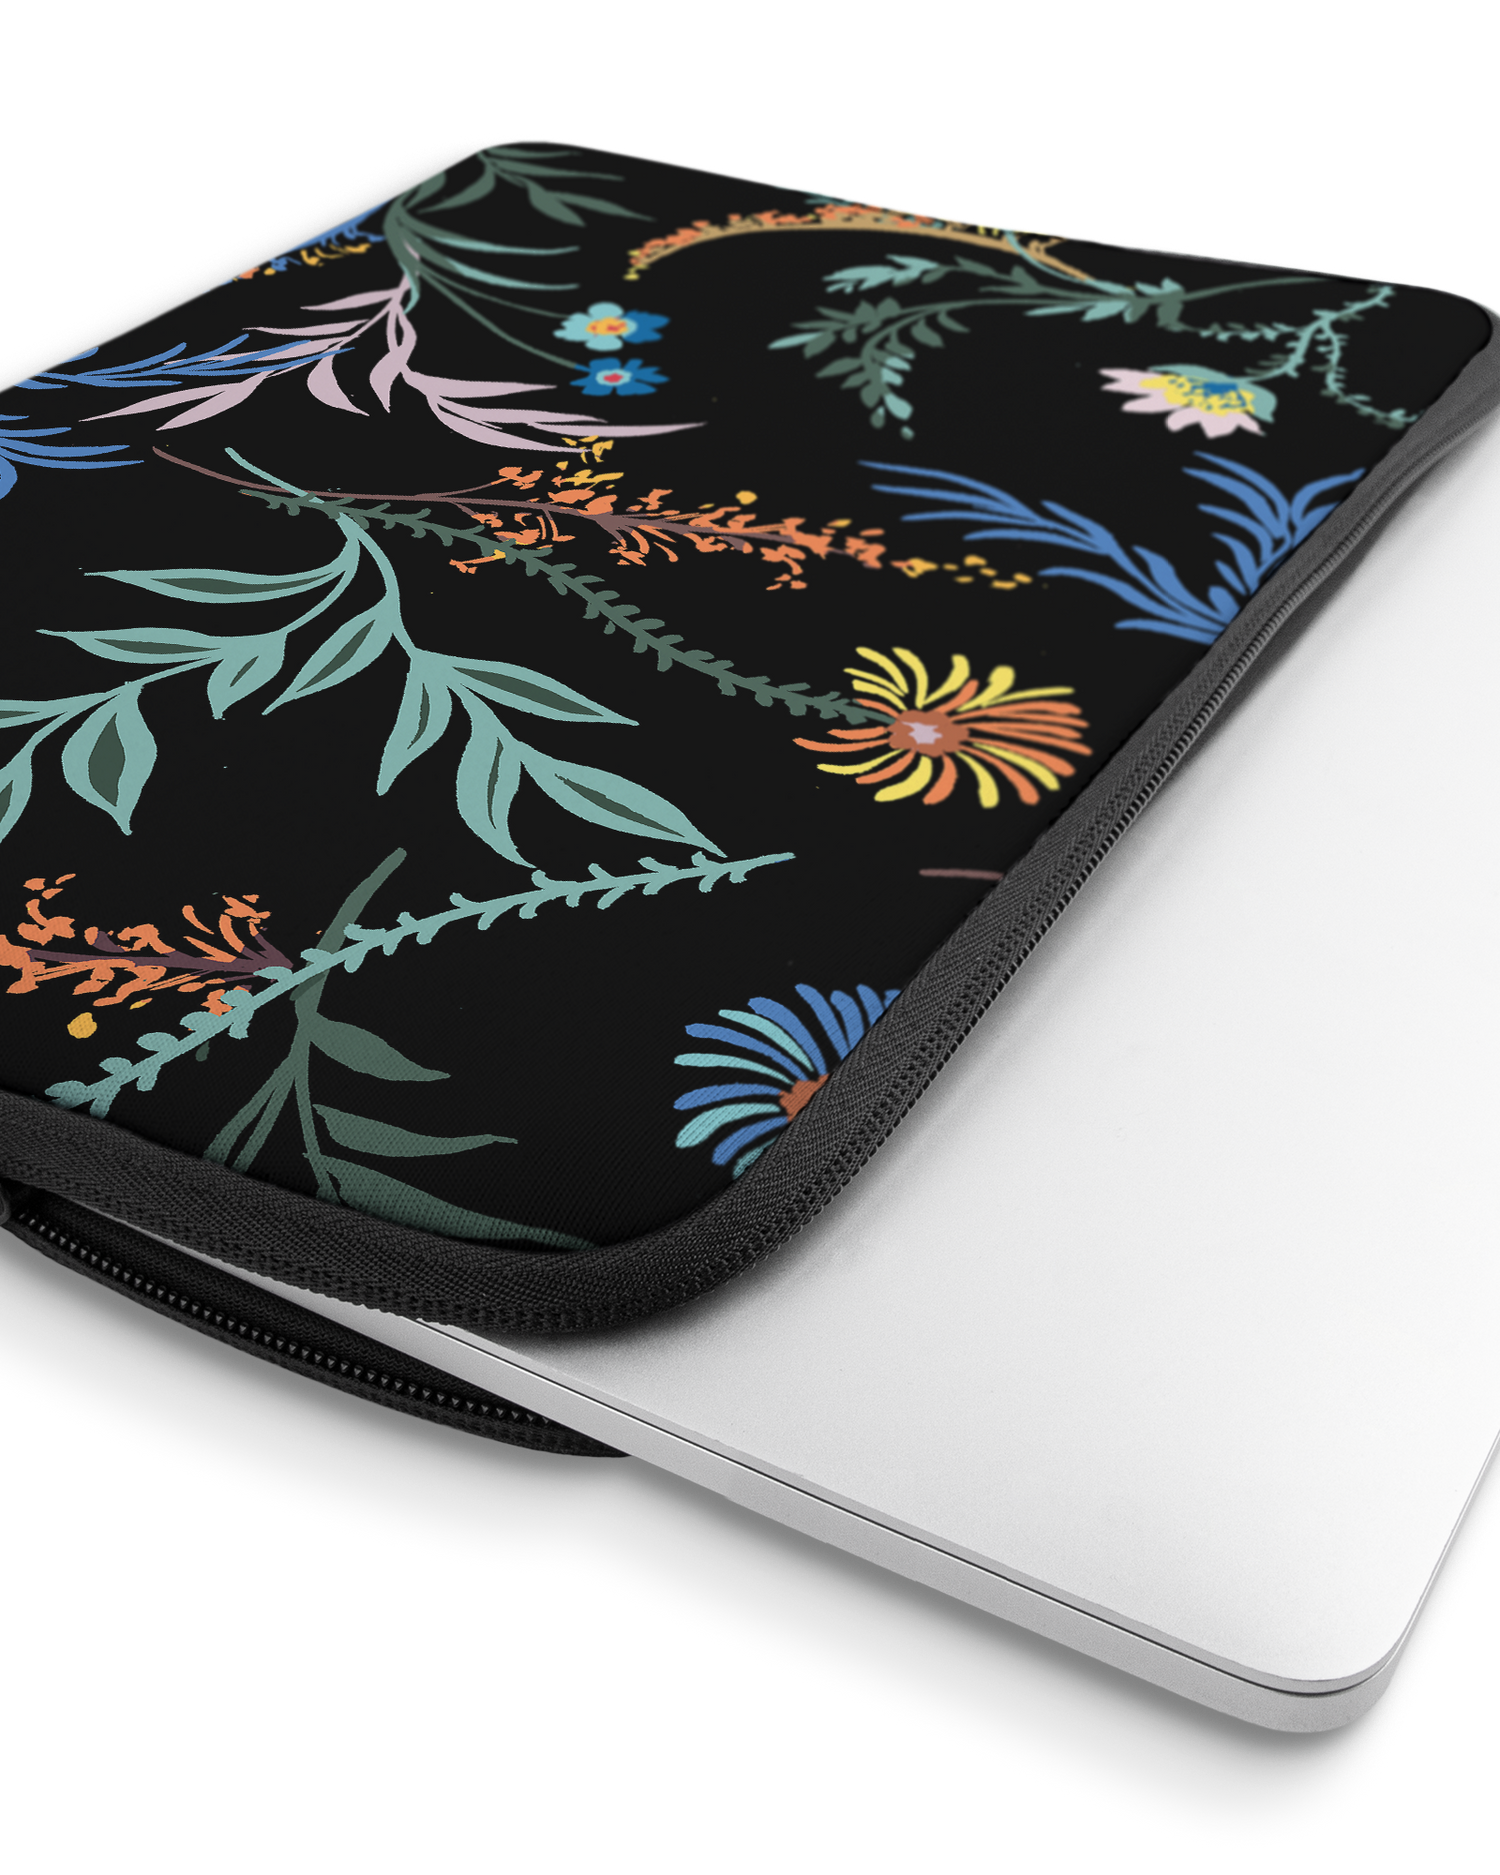 Woodland Spring Floral Laptop Case 16 inch with device inside